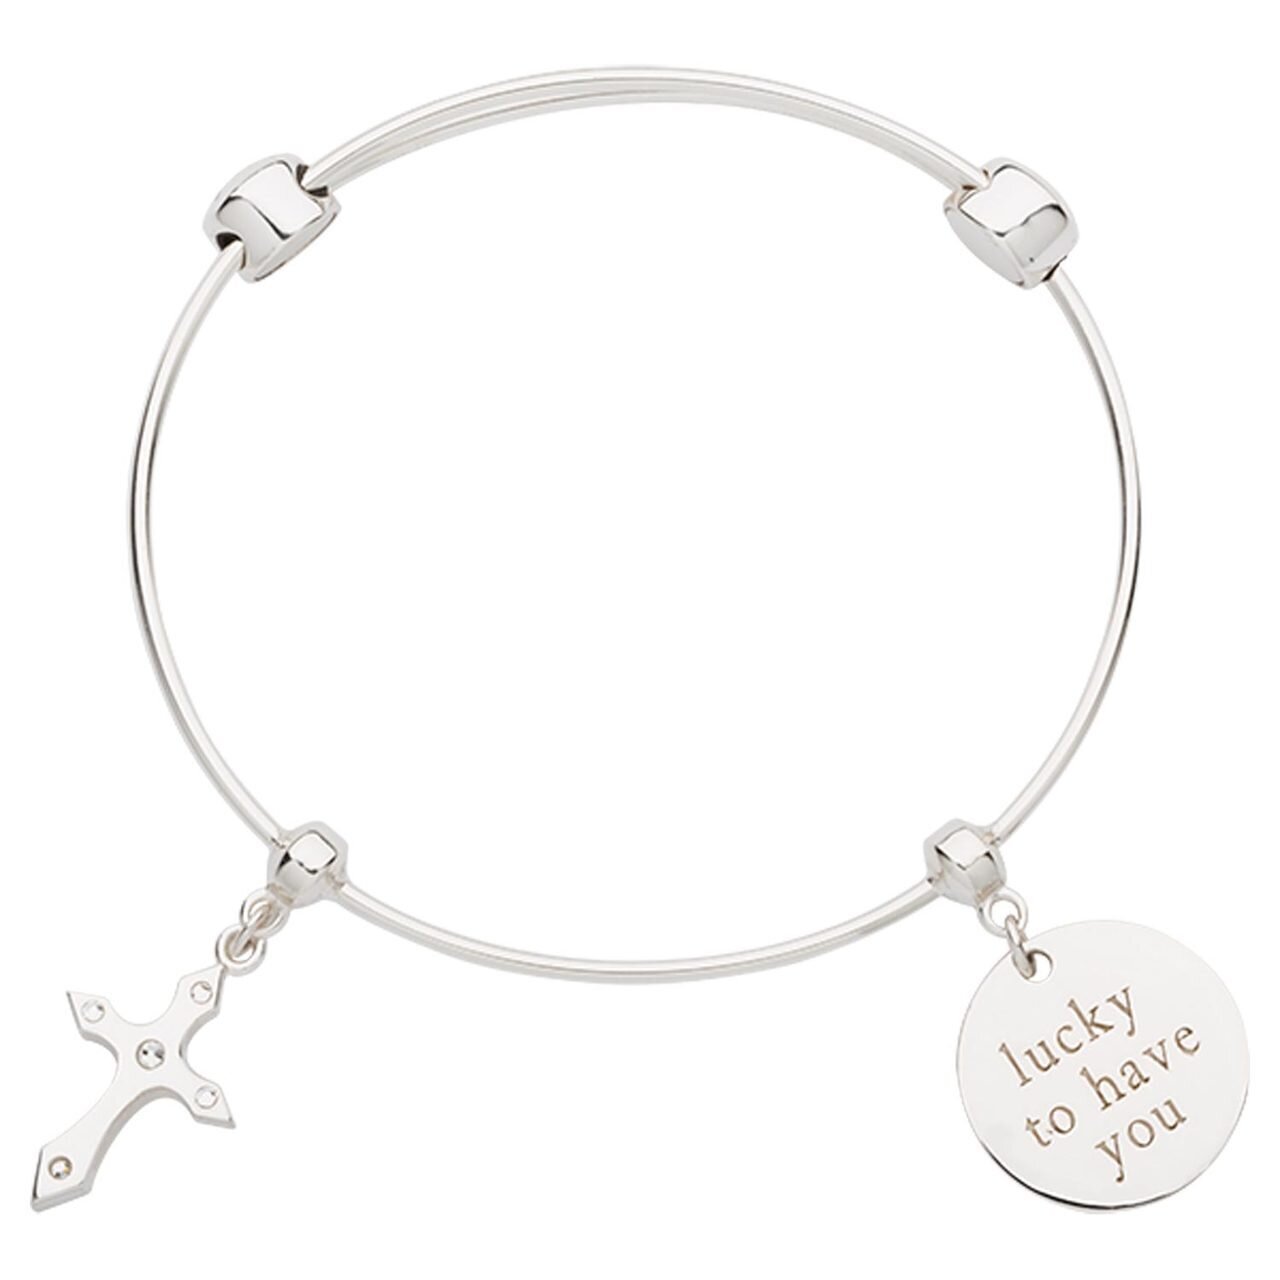 Nikki Lissoni Charm Bangle with Two Fixed Charms Cross Lucky To Have You Silver-plated 17cm B1159S17